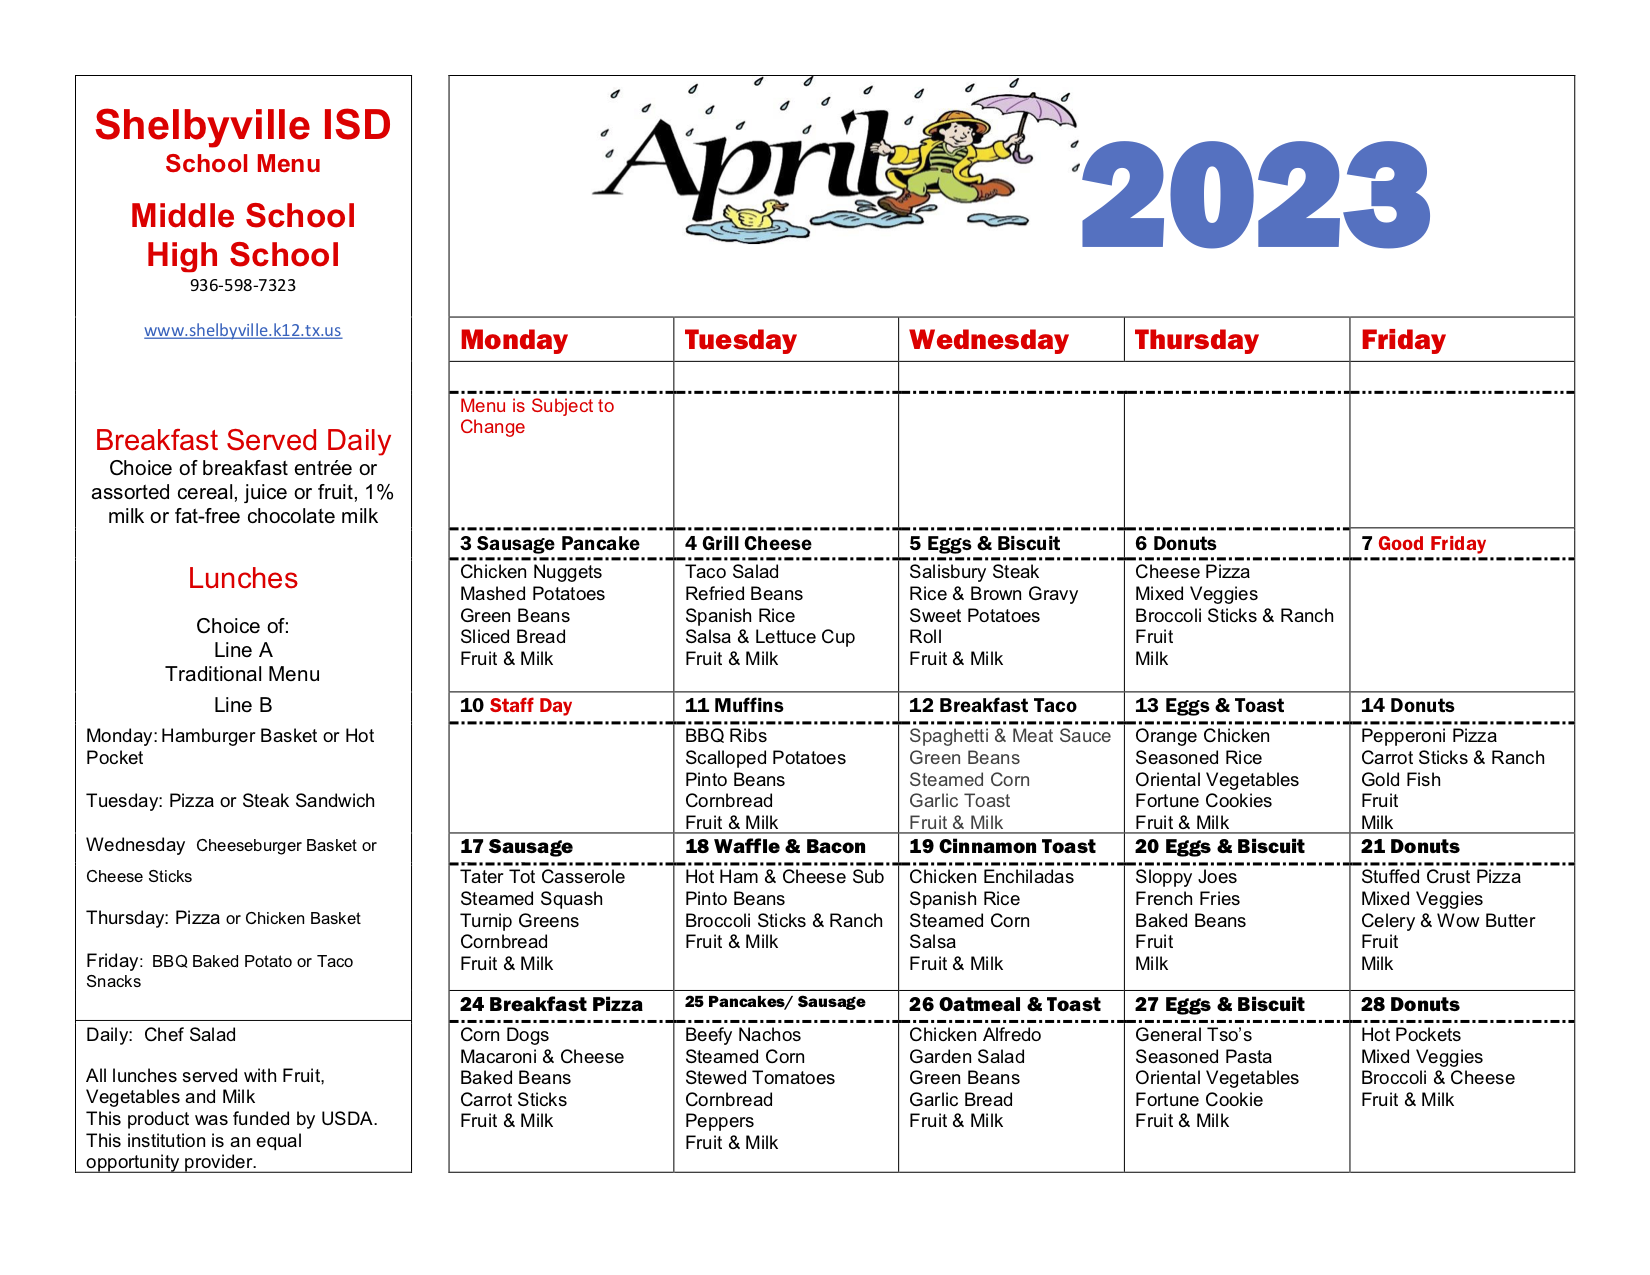 Shelbyville's breakfast and lunch menus for April.